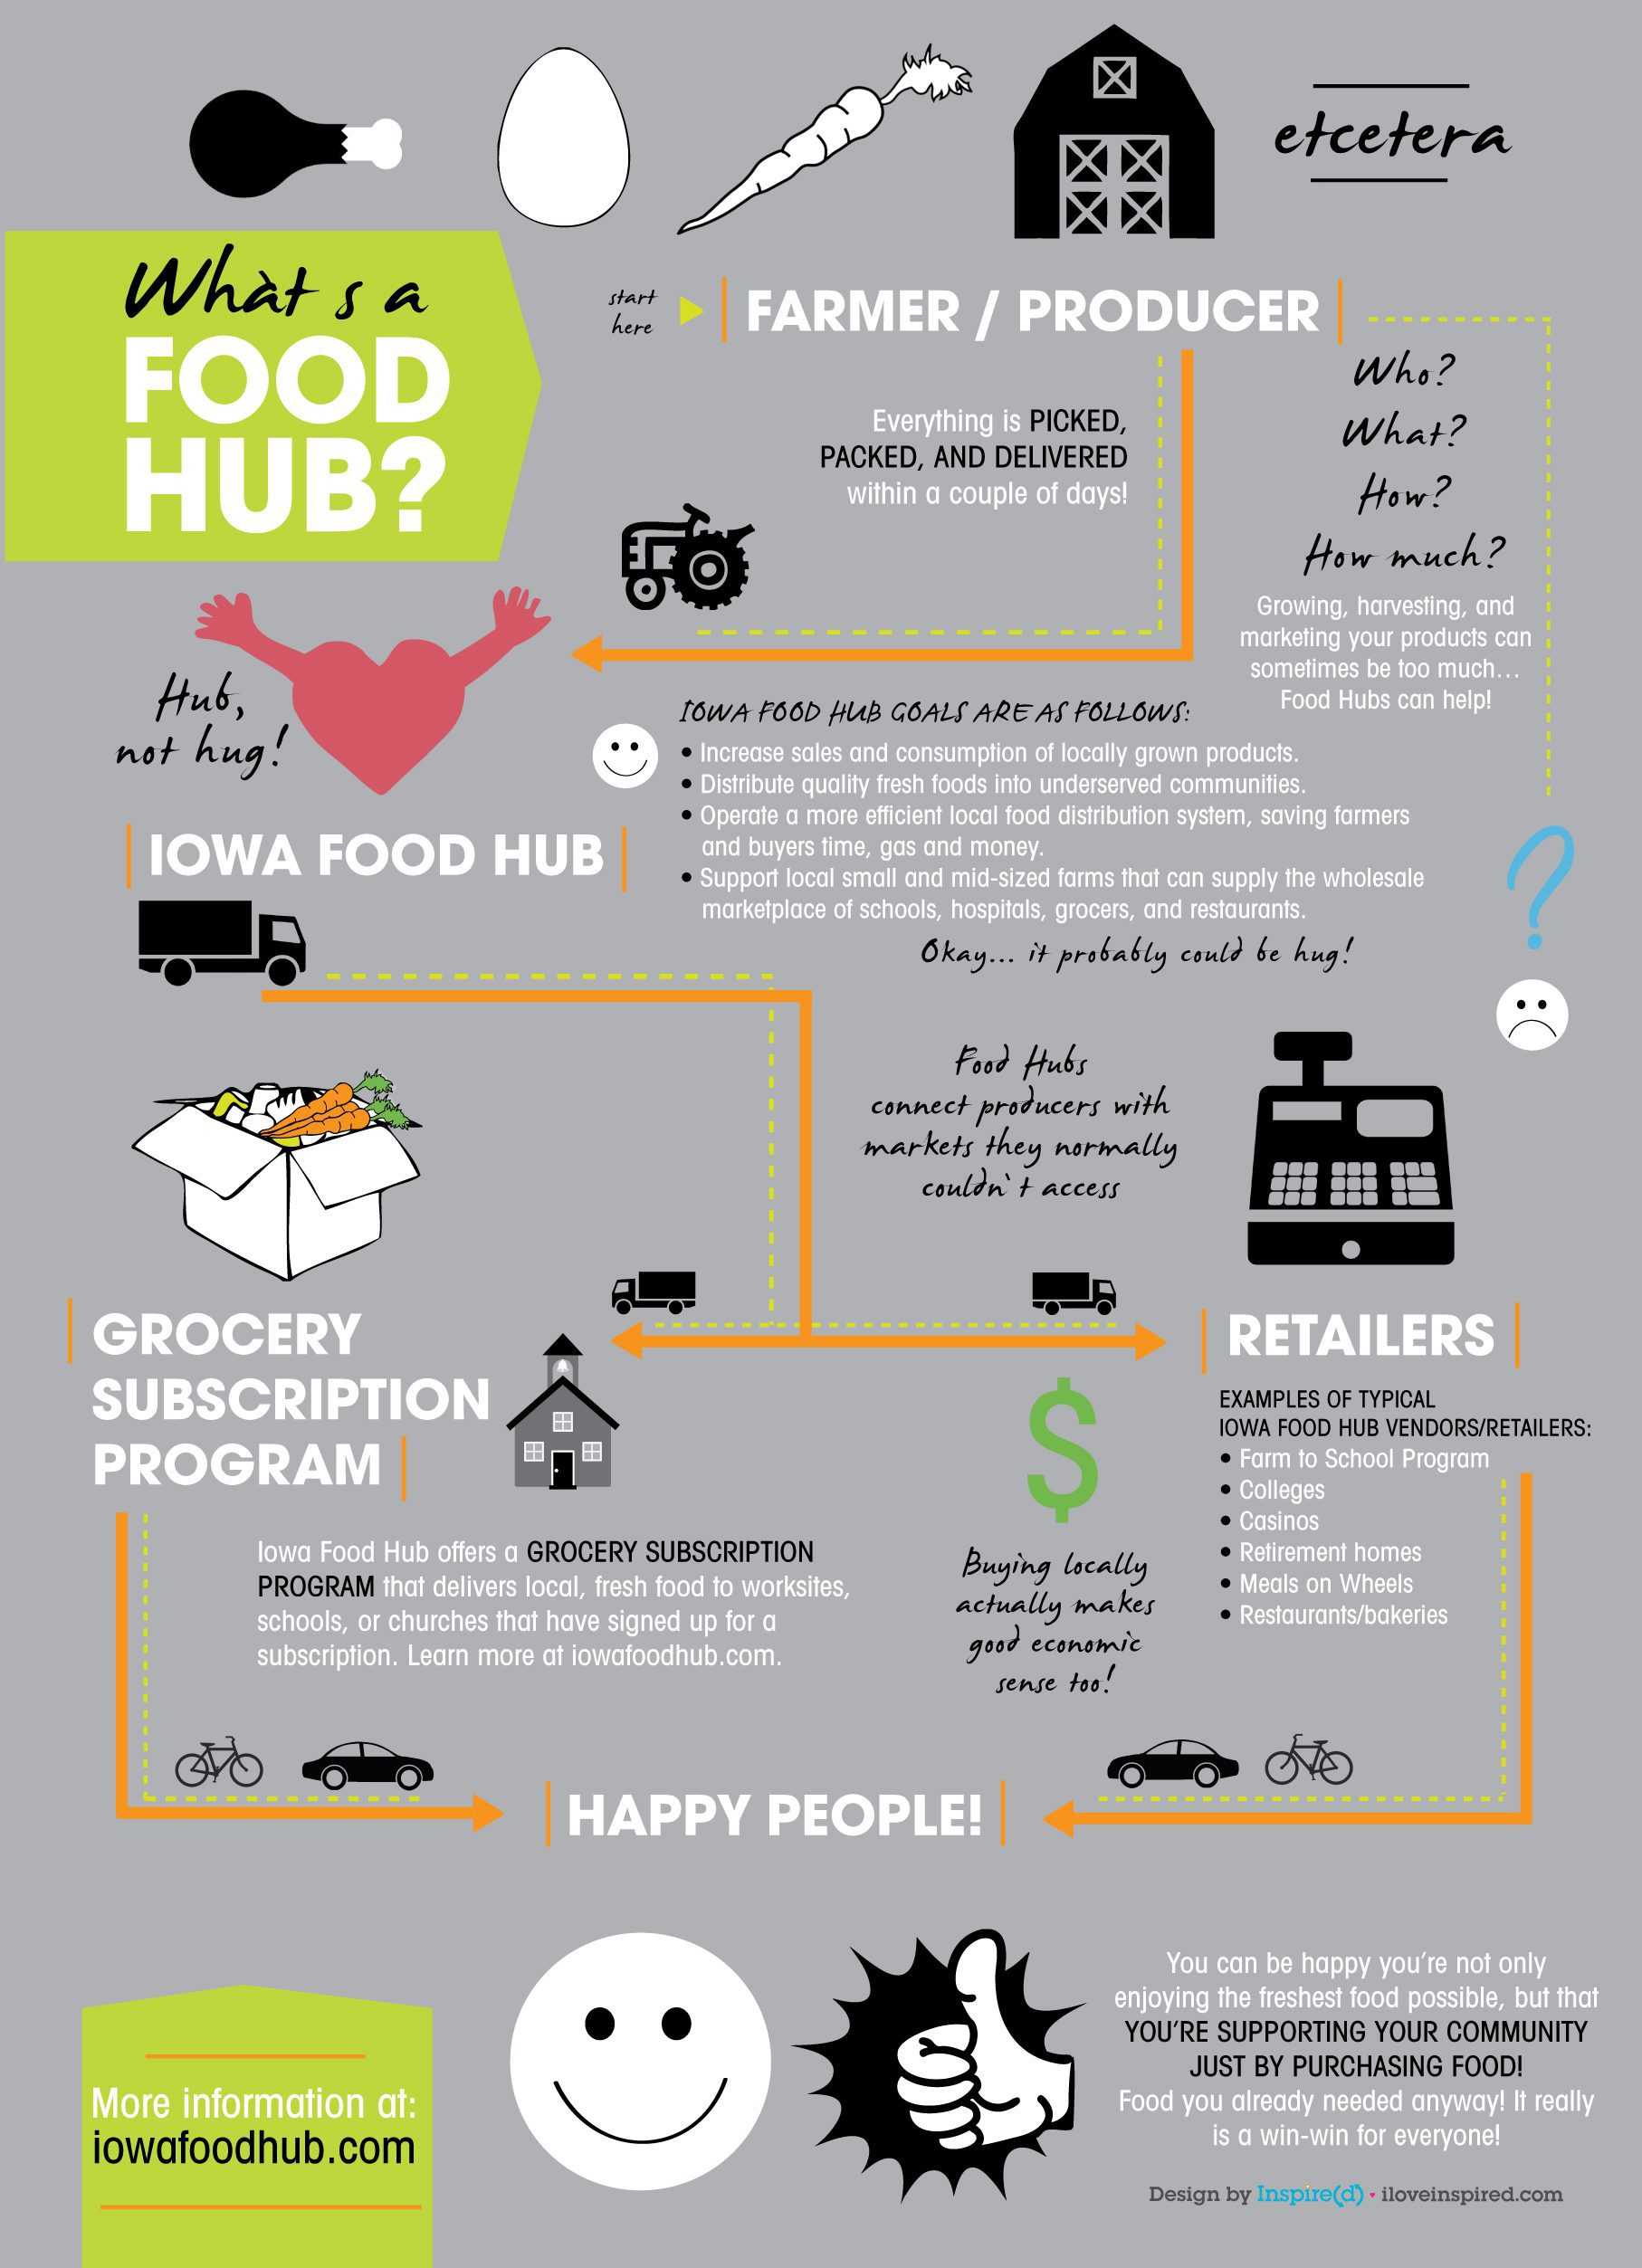 What’s a Food Hub Anyway?